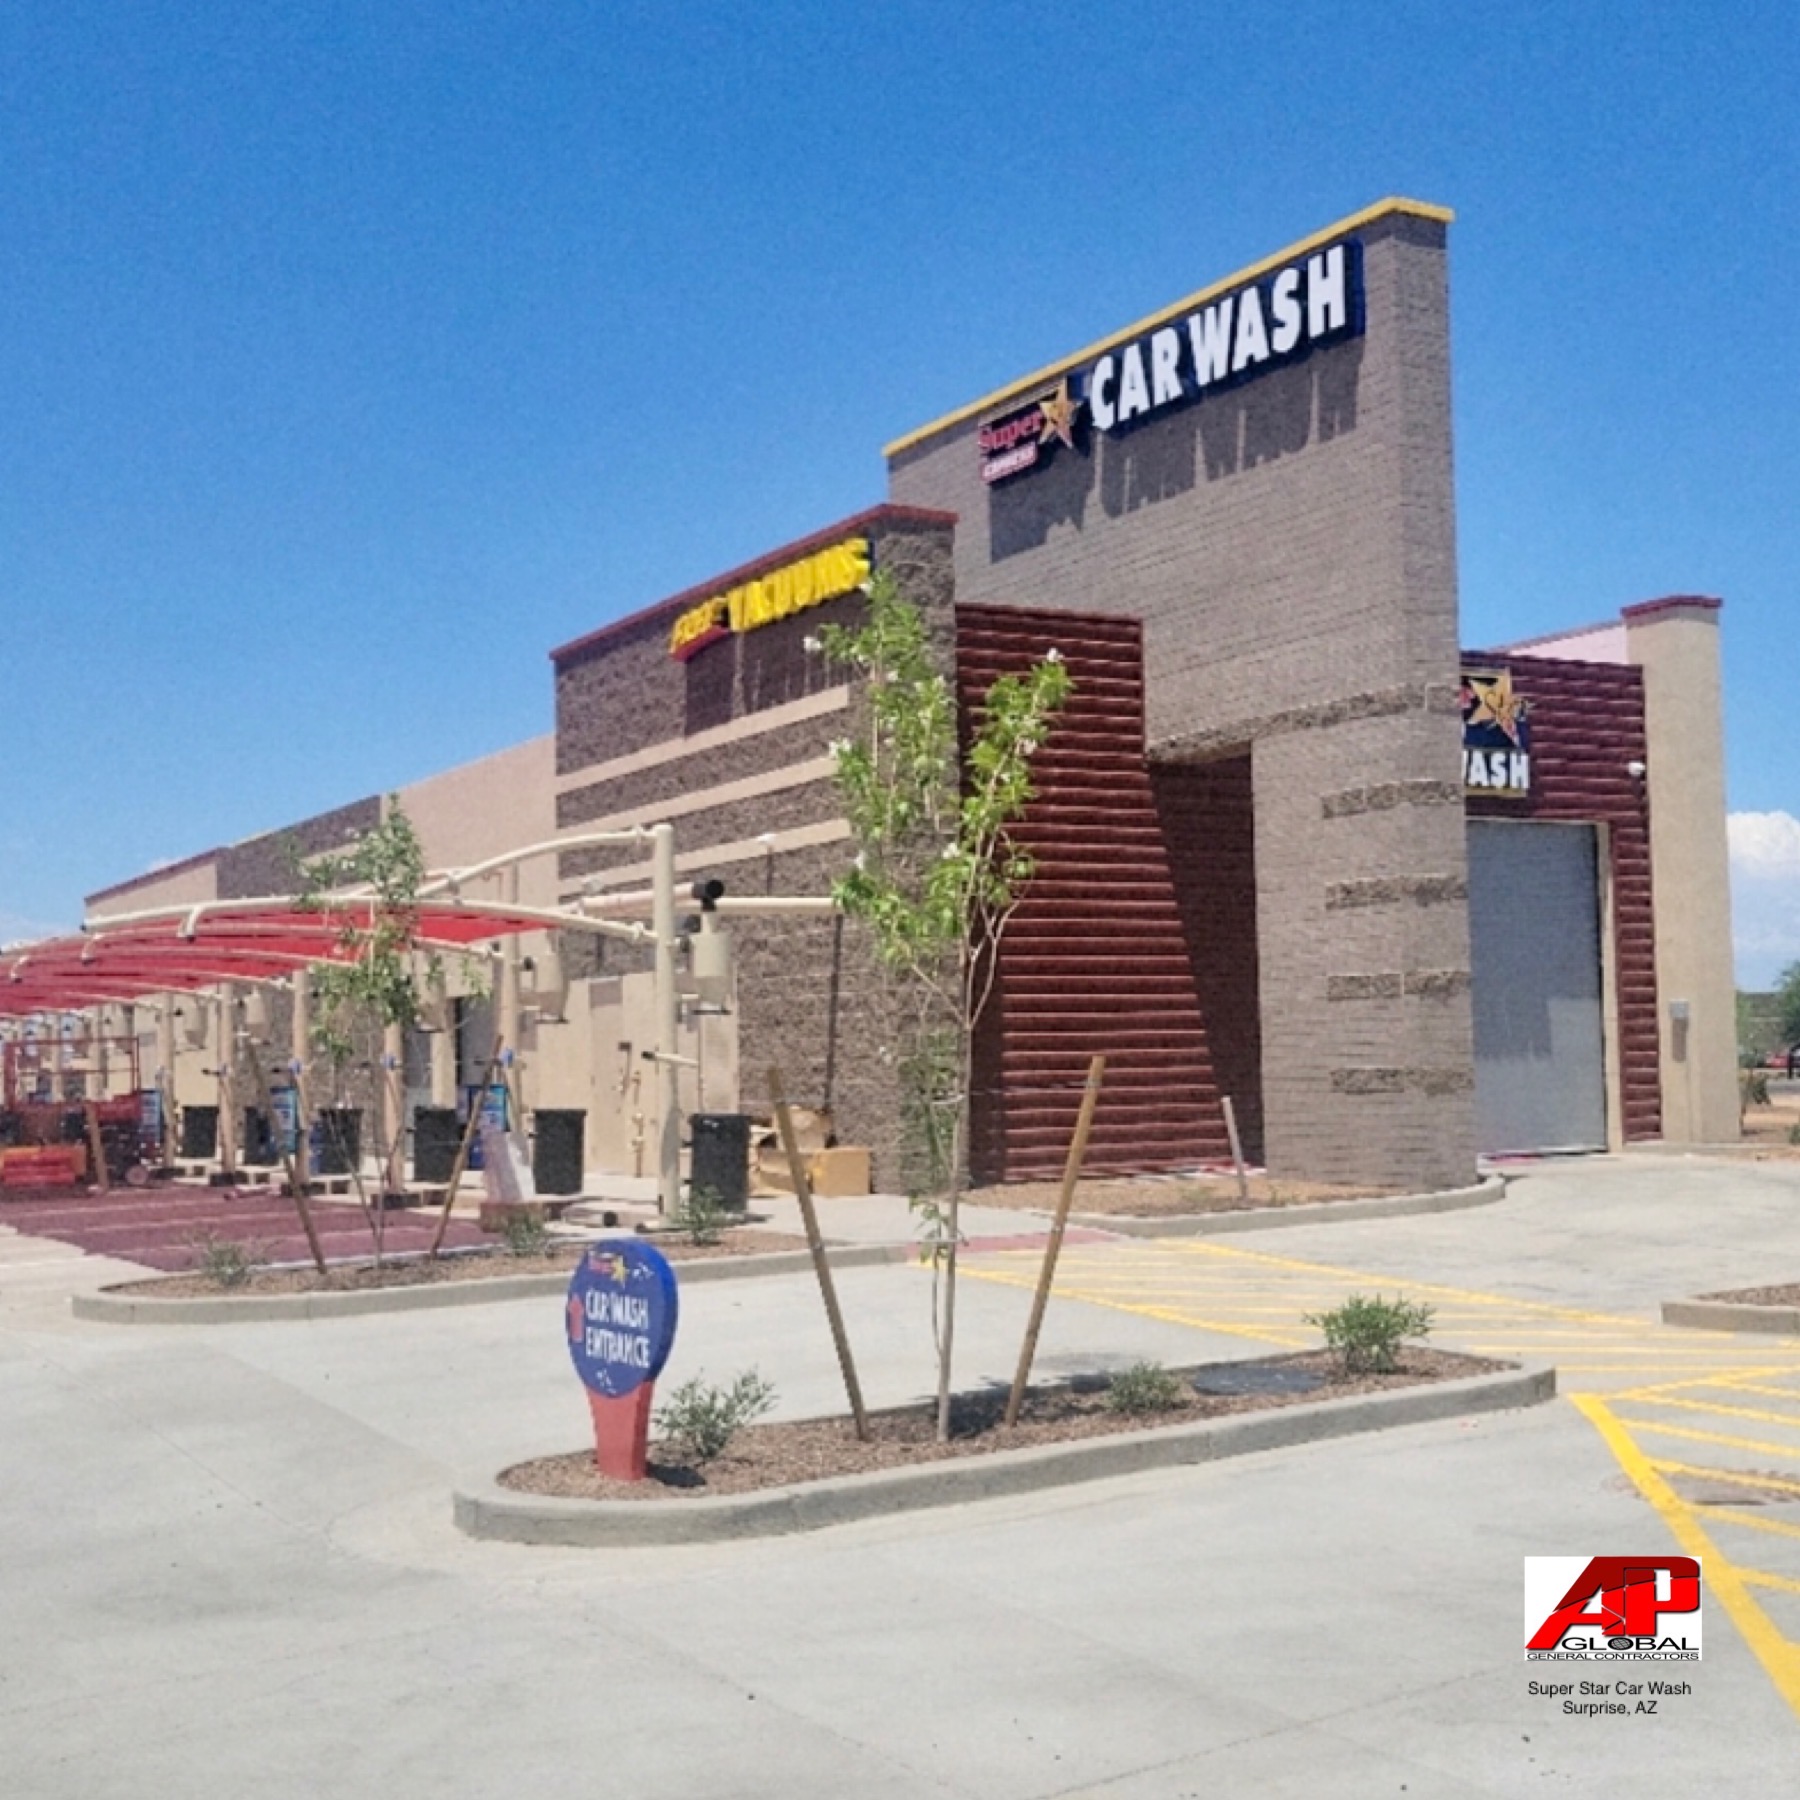 Super Star Car Wash Closes on New Tucson Site for $1.43 Million